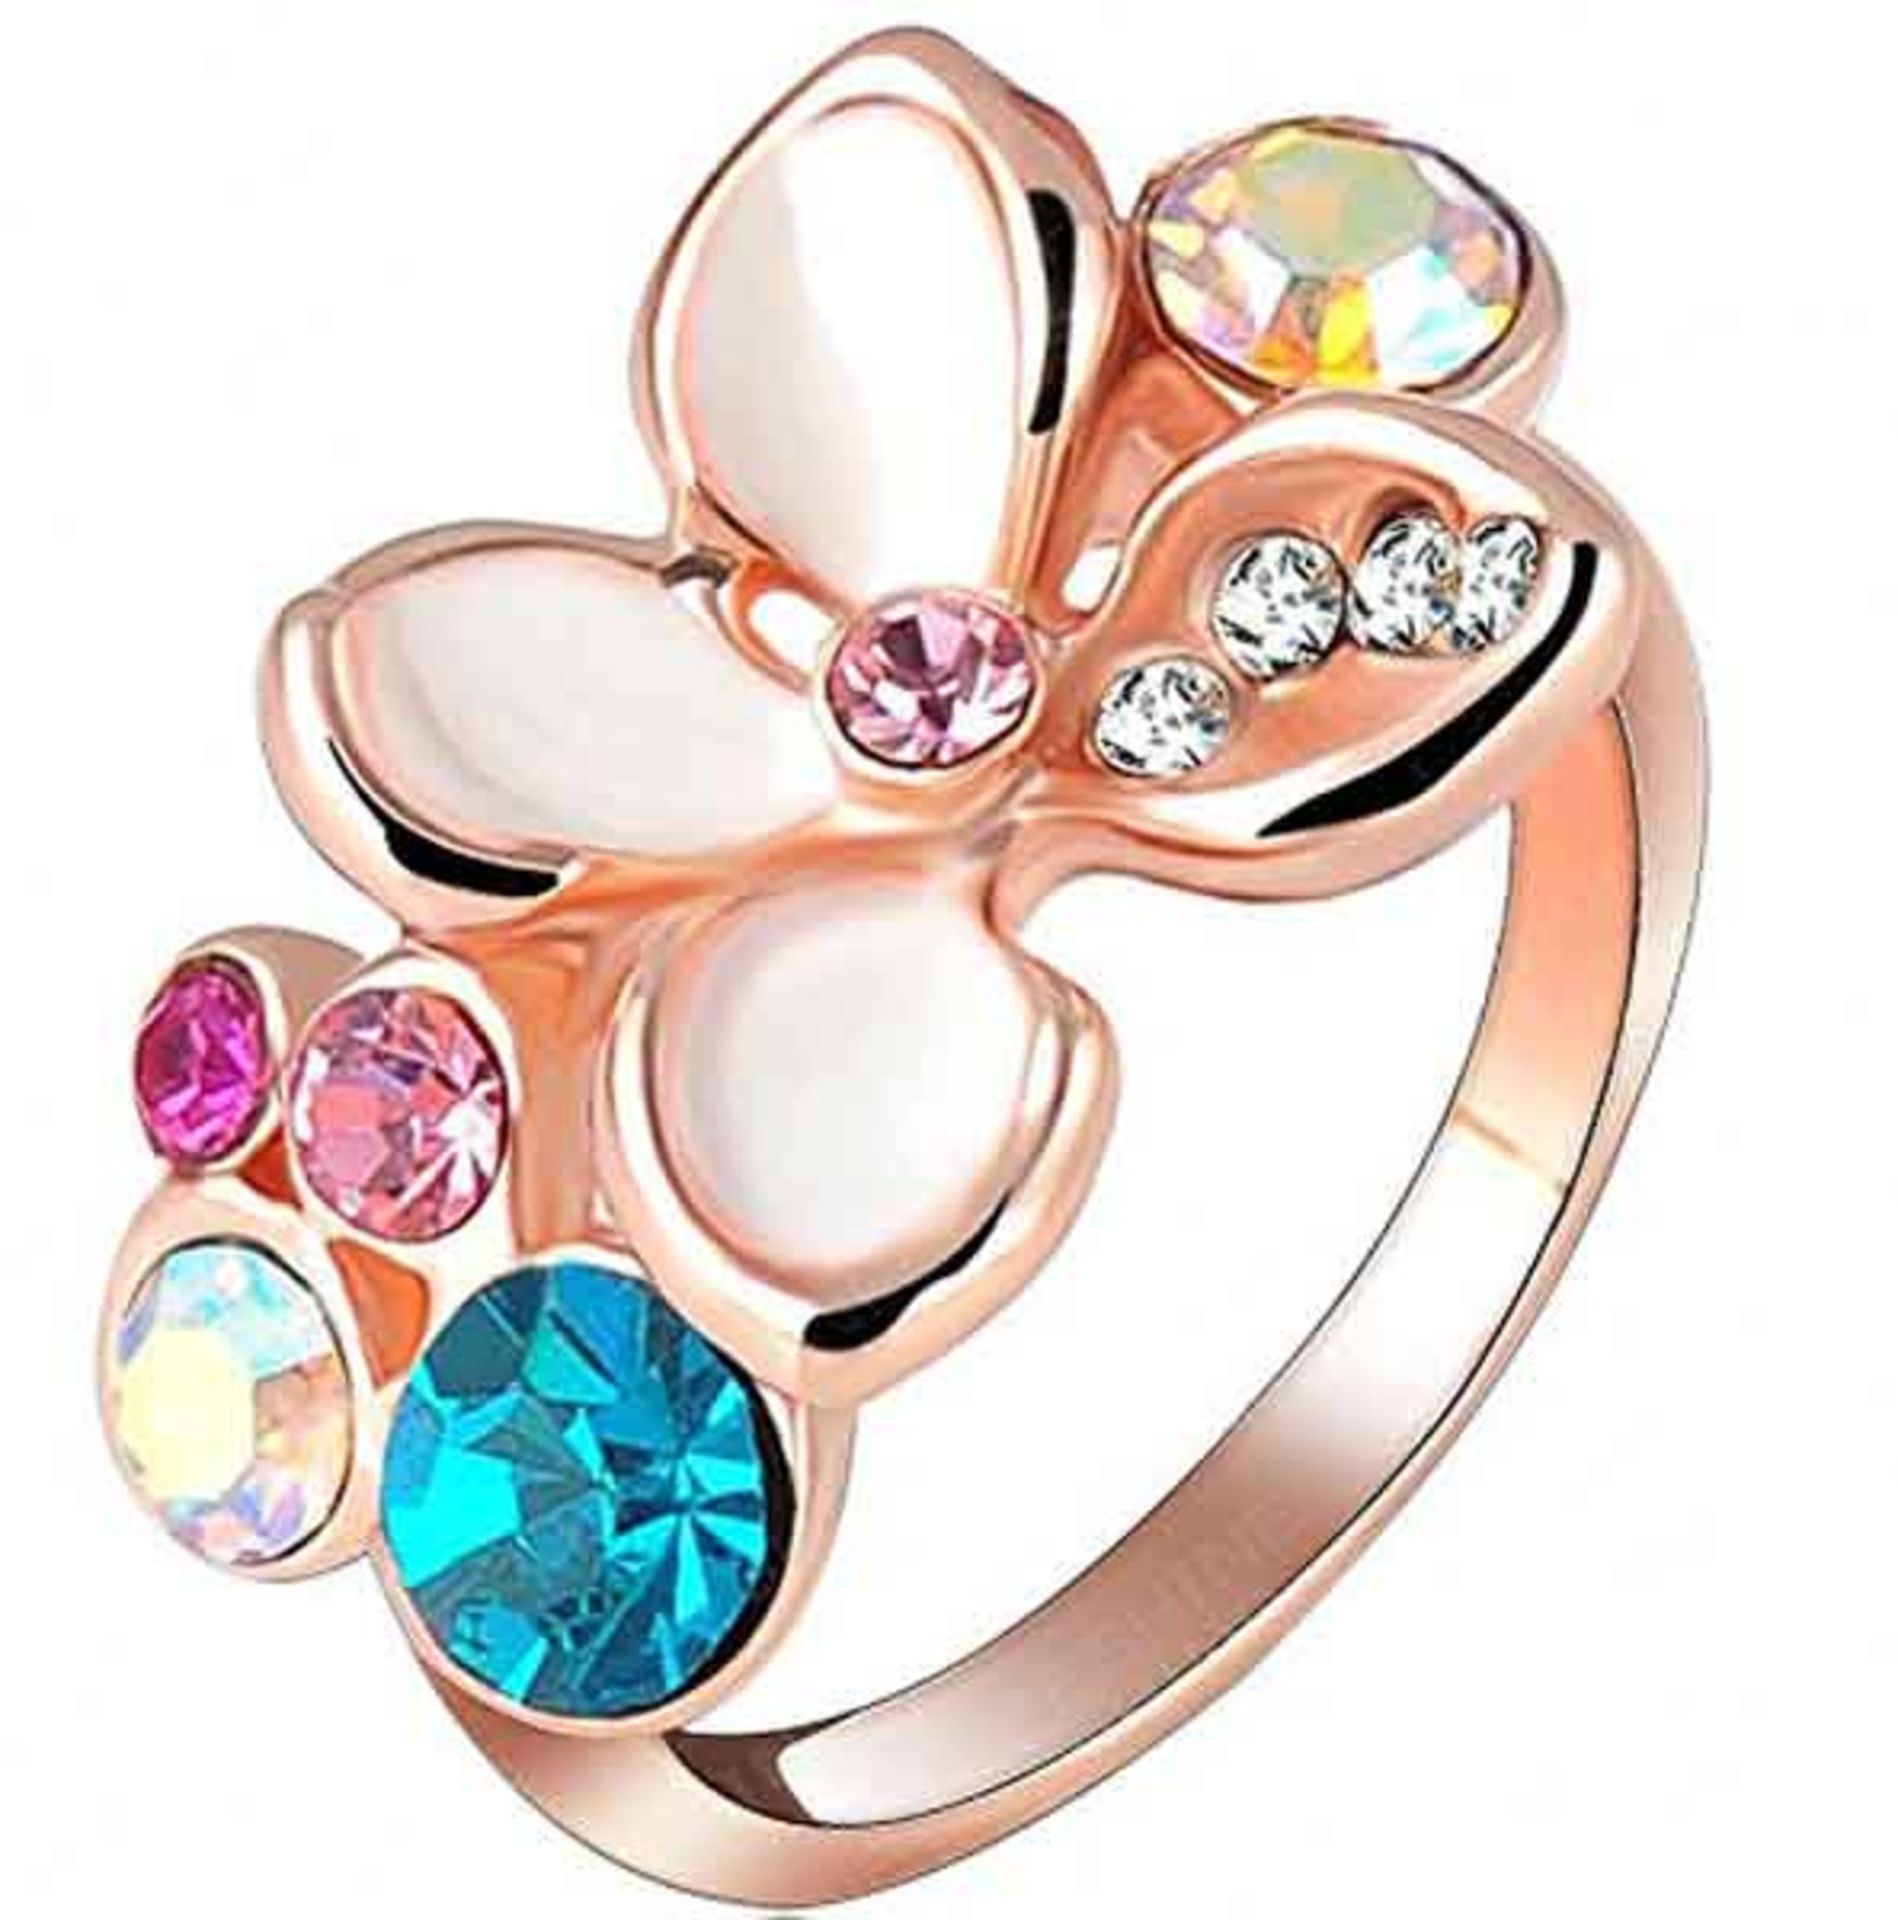 V Brand New Platinum Plated Austrian Crystal Multi Stone RIng X 2 YOUR BID PRICE TO BE MULTIPLIED BY